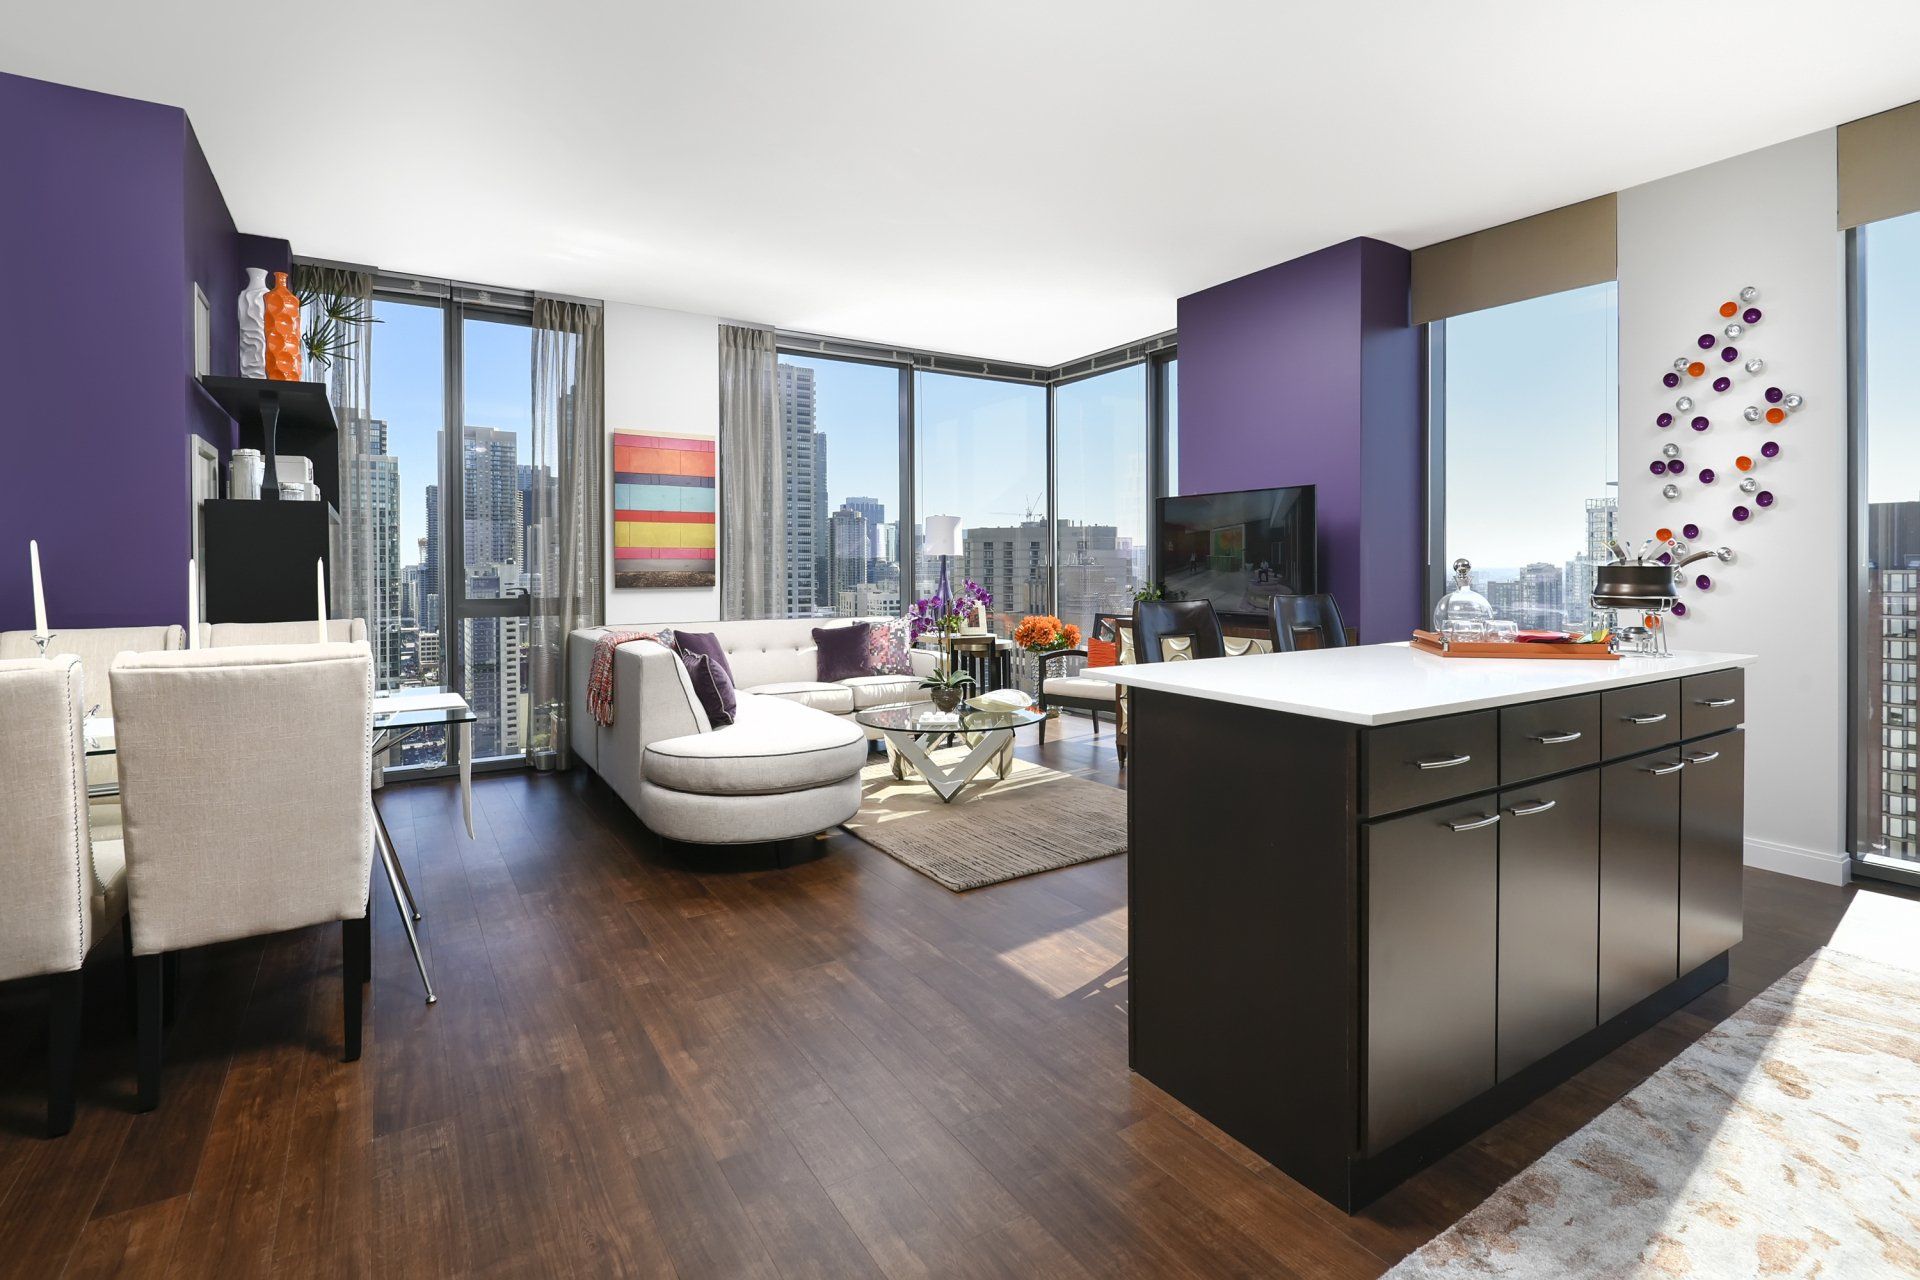 An artist 's impression of a living room with purple walls at State & Chestnut.